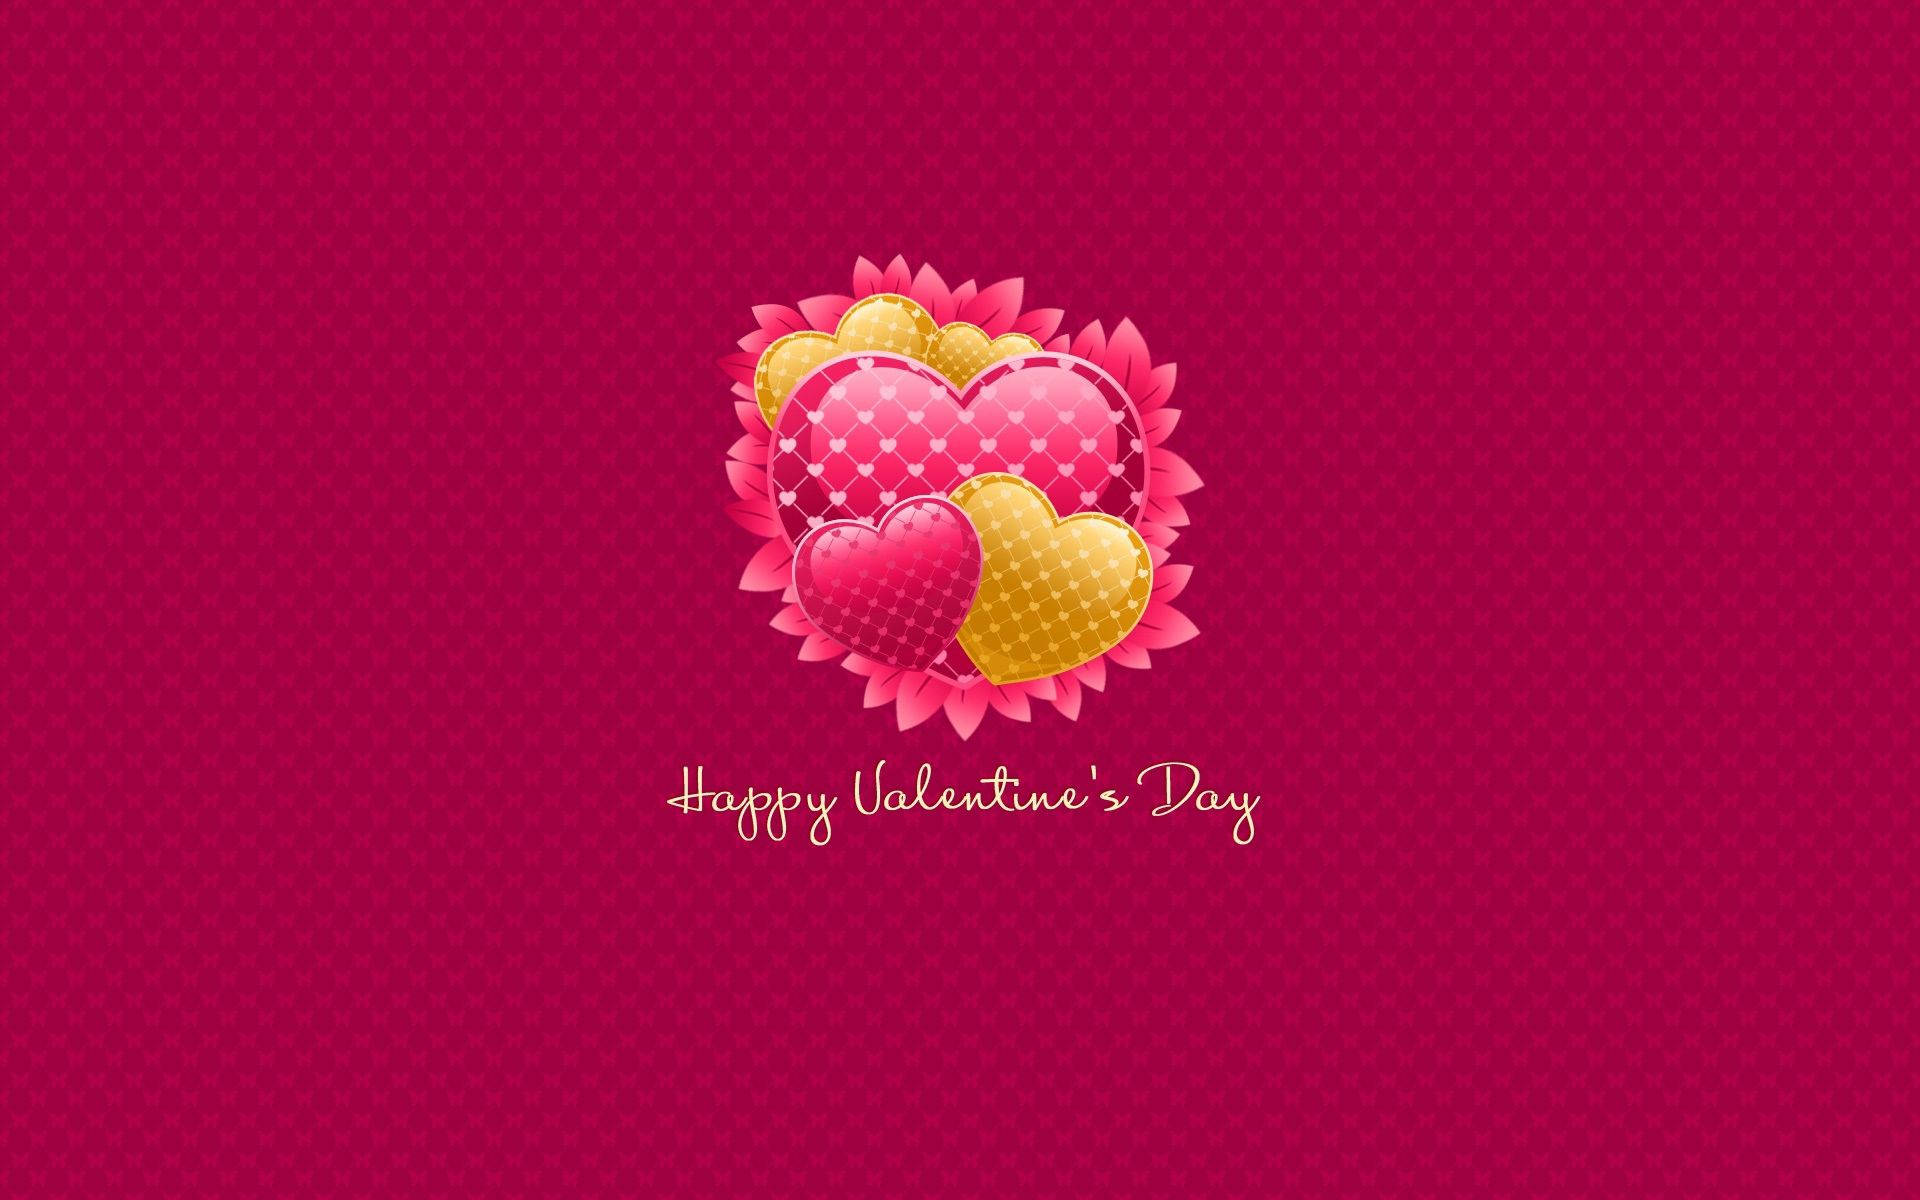 "Celebrate love this Valentine's Day with a sweet message of love" Wallpaper